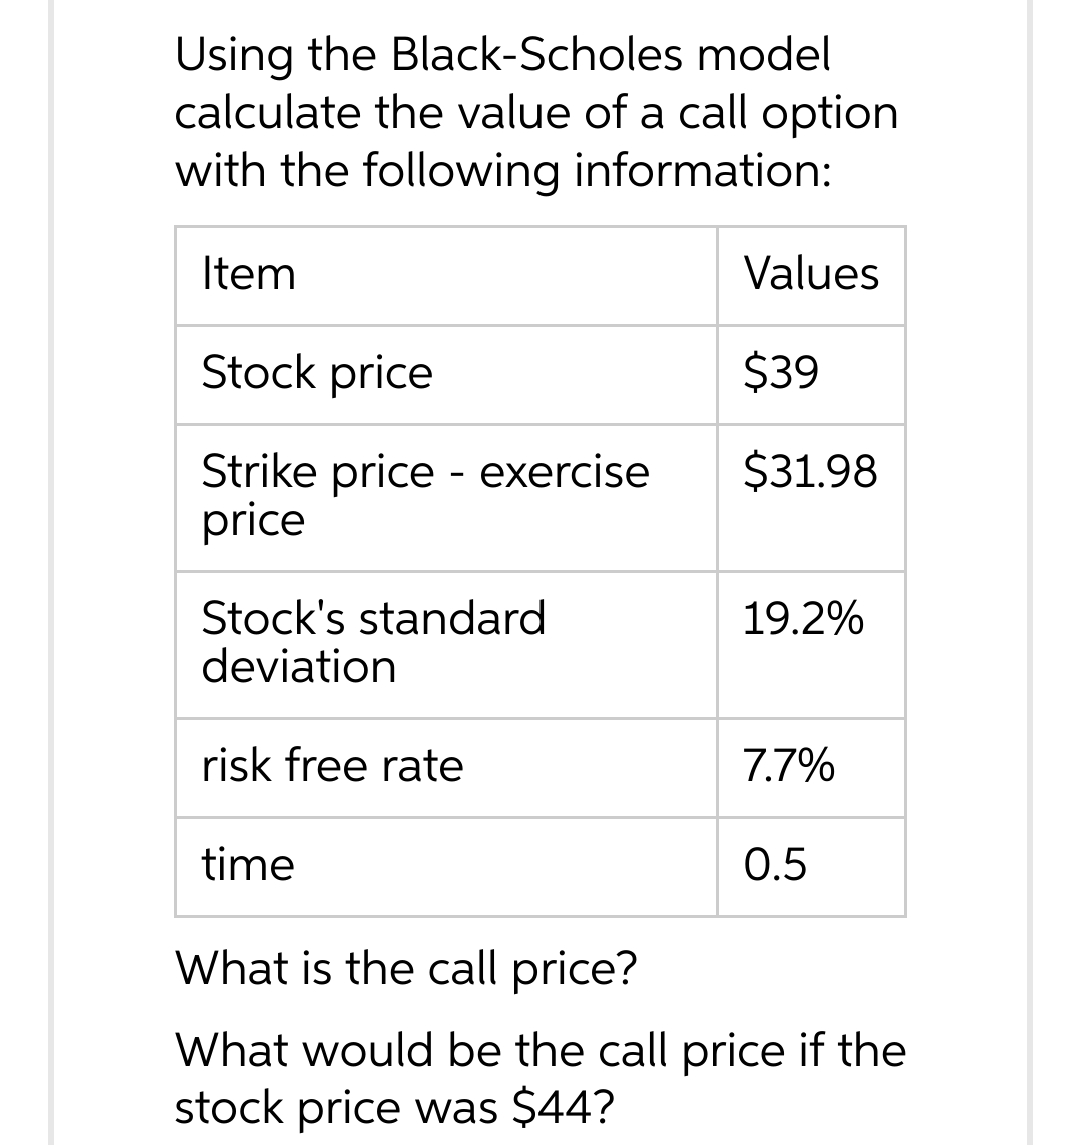 Using the Black-Scholes model
calculate the value of a call option
with the following information:
Item
Stock price
Strike price - exercise
price
Stock's standard
deviation
risk free rate
time
Values
$39
$31.98
19.2%
7.7%
0.5
What is the call price?
What would be the call price if the
stock price was $44?